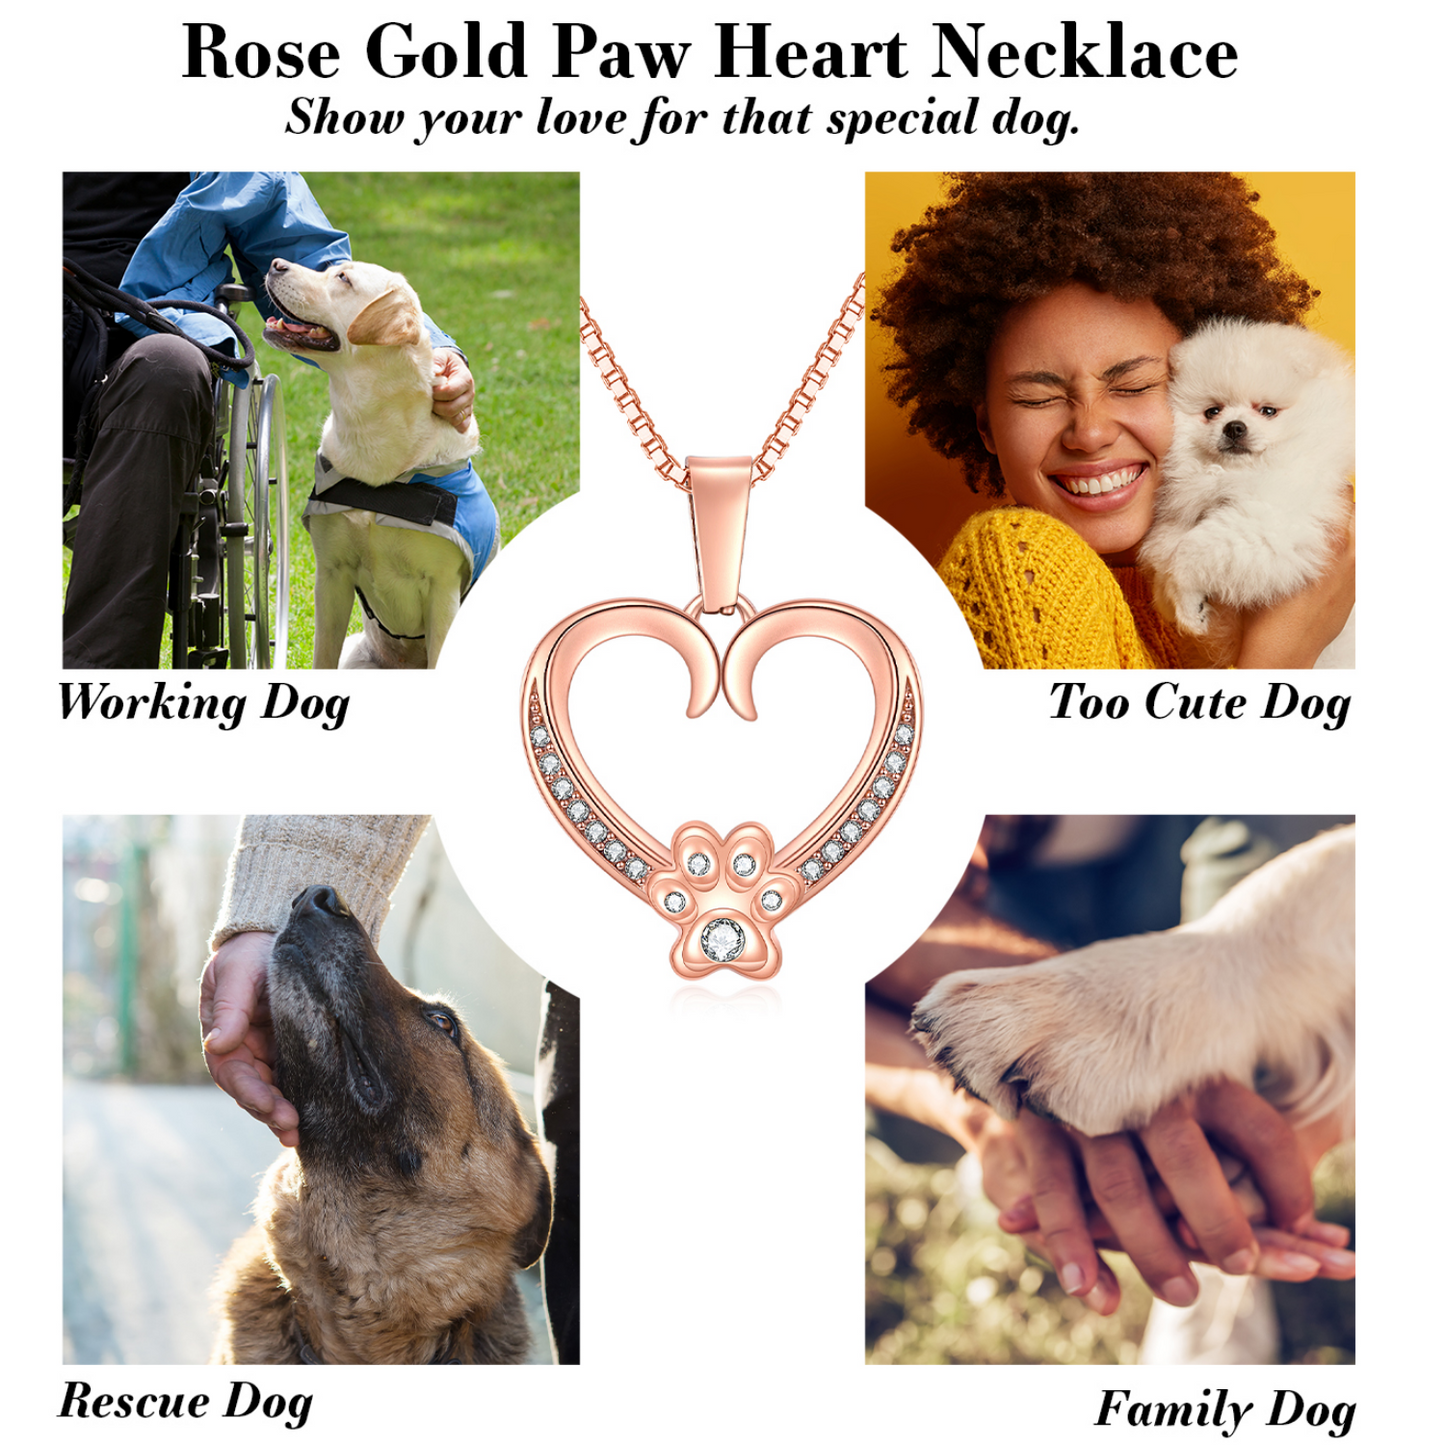 Heart & Paw Print Necklace: A Personalized Token of Love - PuppyJo